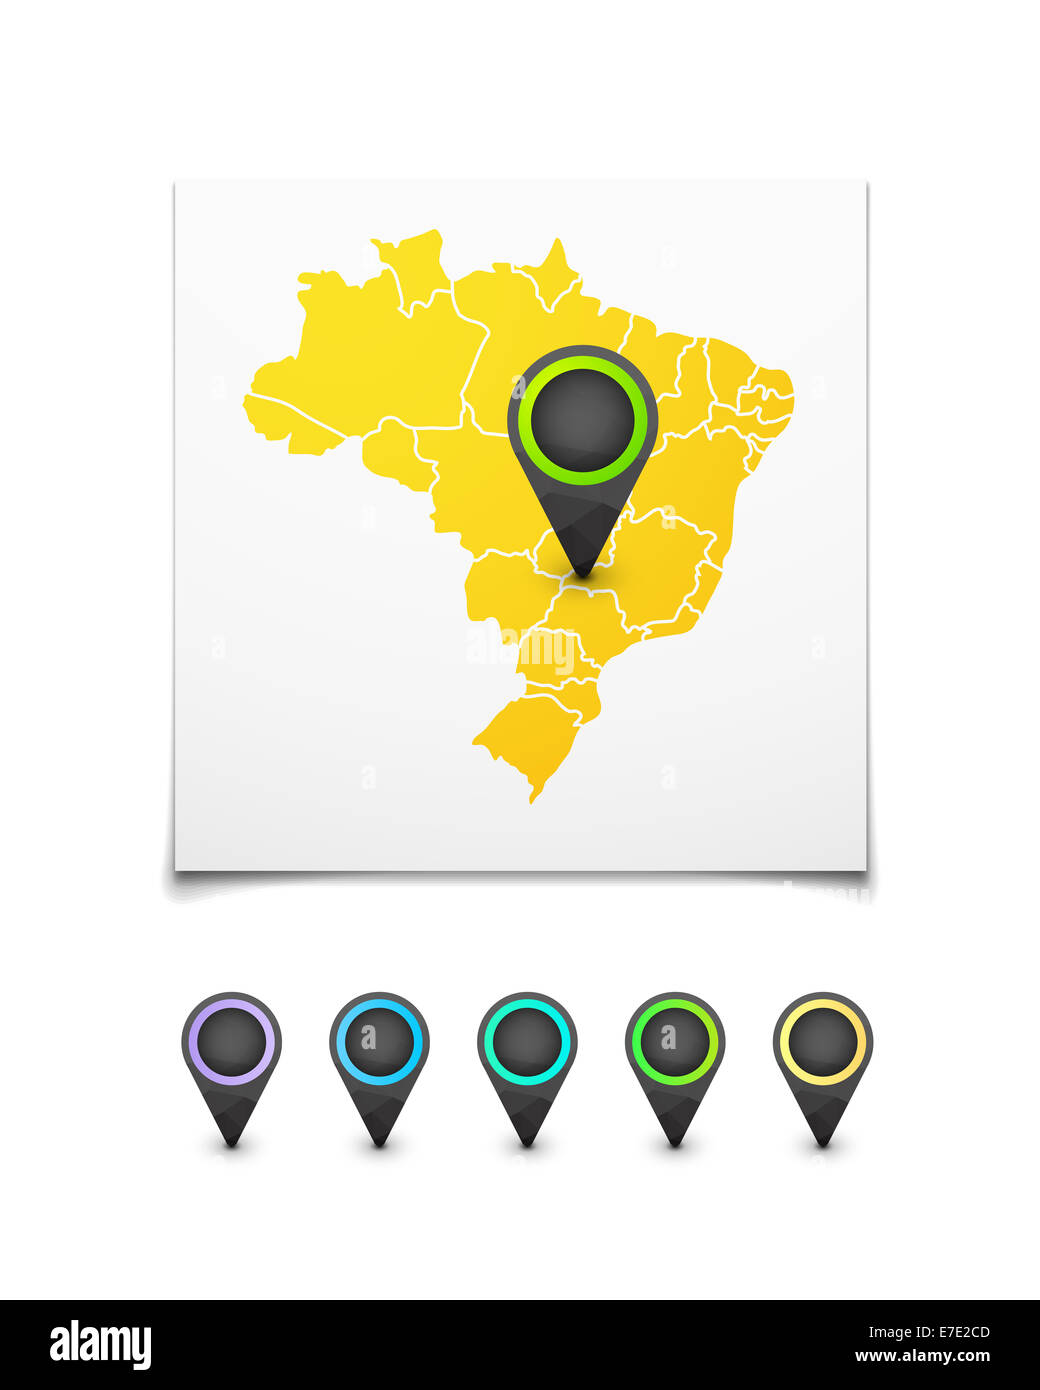 Map with a marker on Brazil Stock Photo